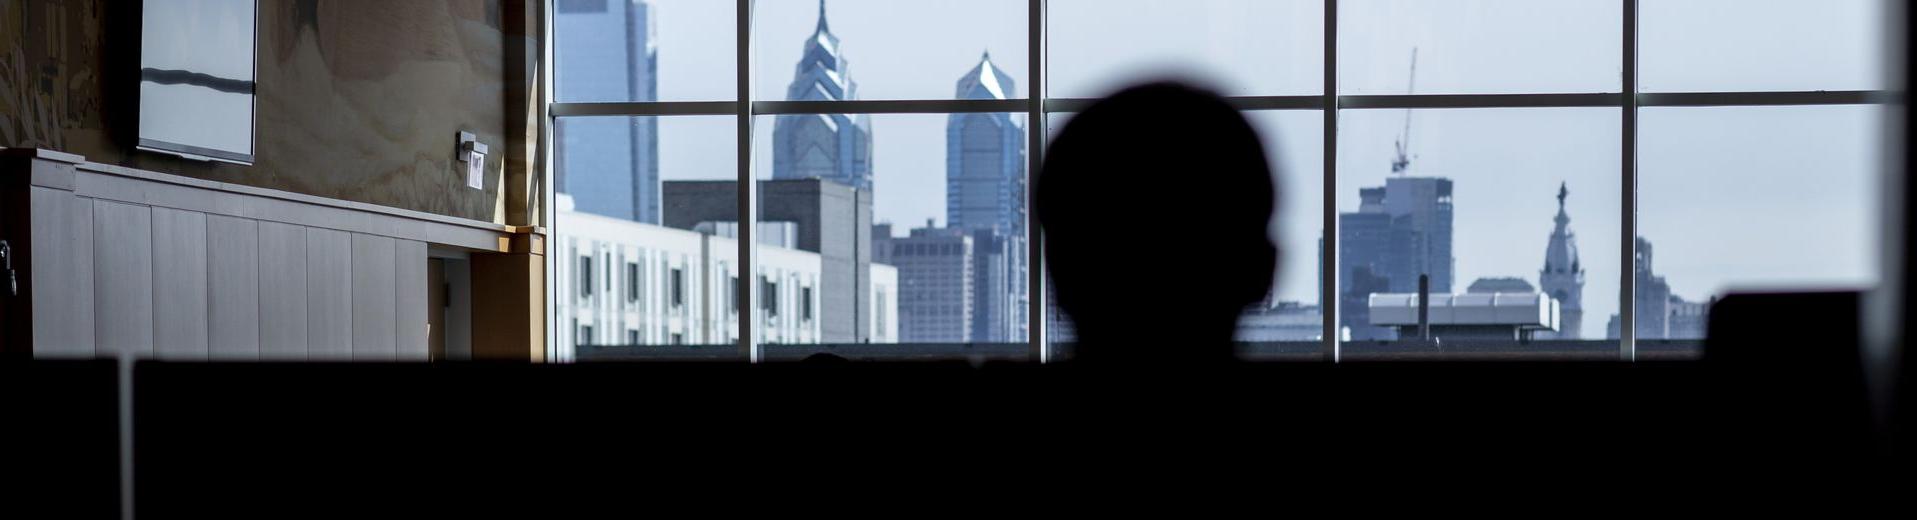 A student looks at the Philadelphia skyline through the windows of a building at Temple University.